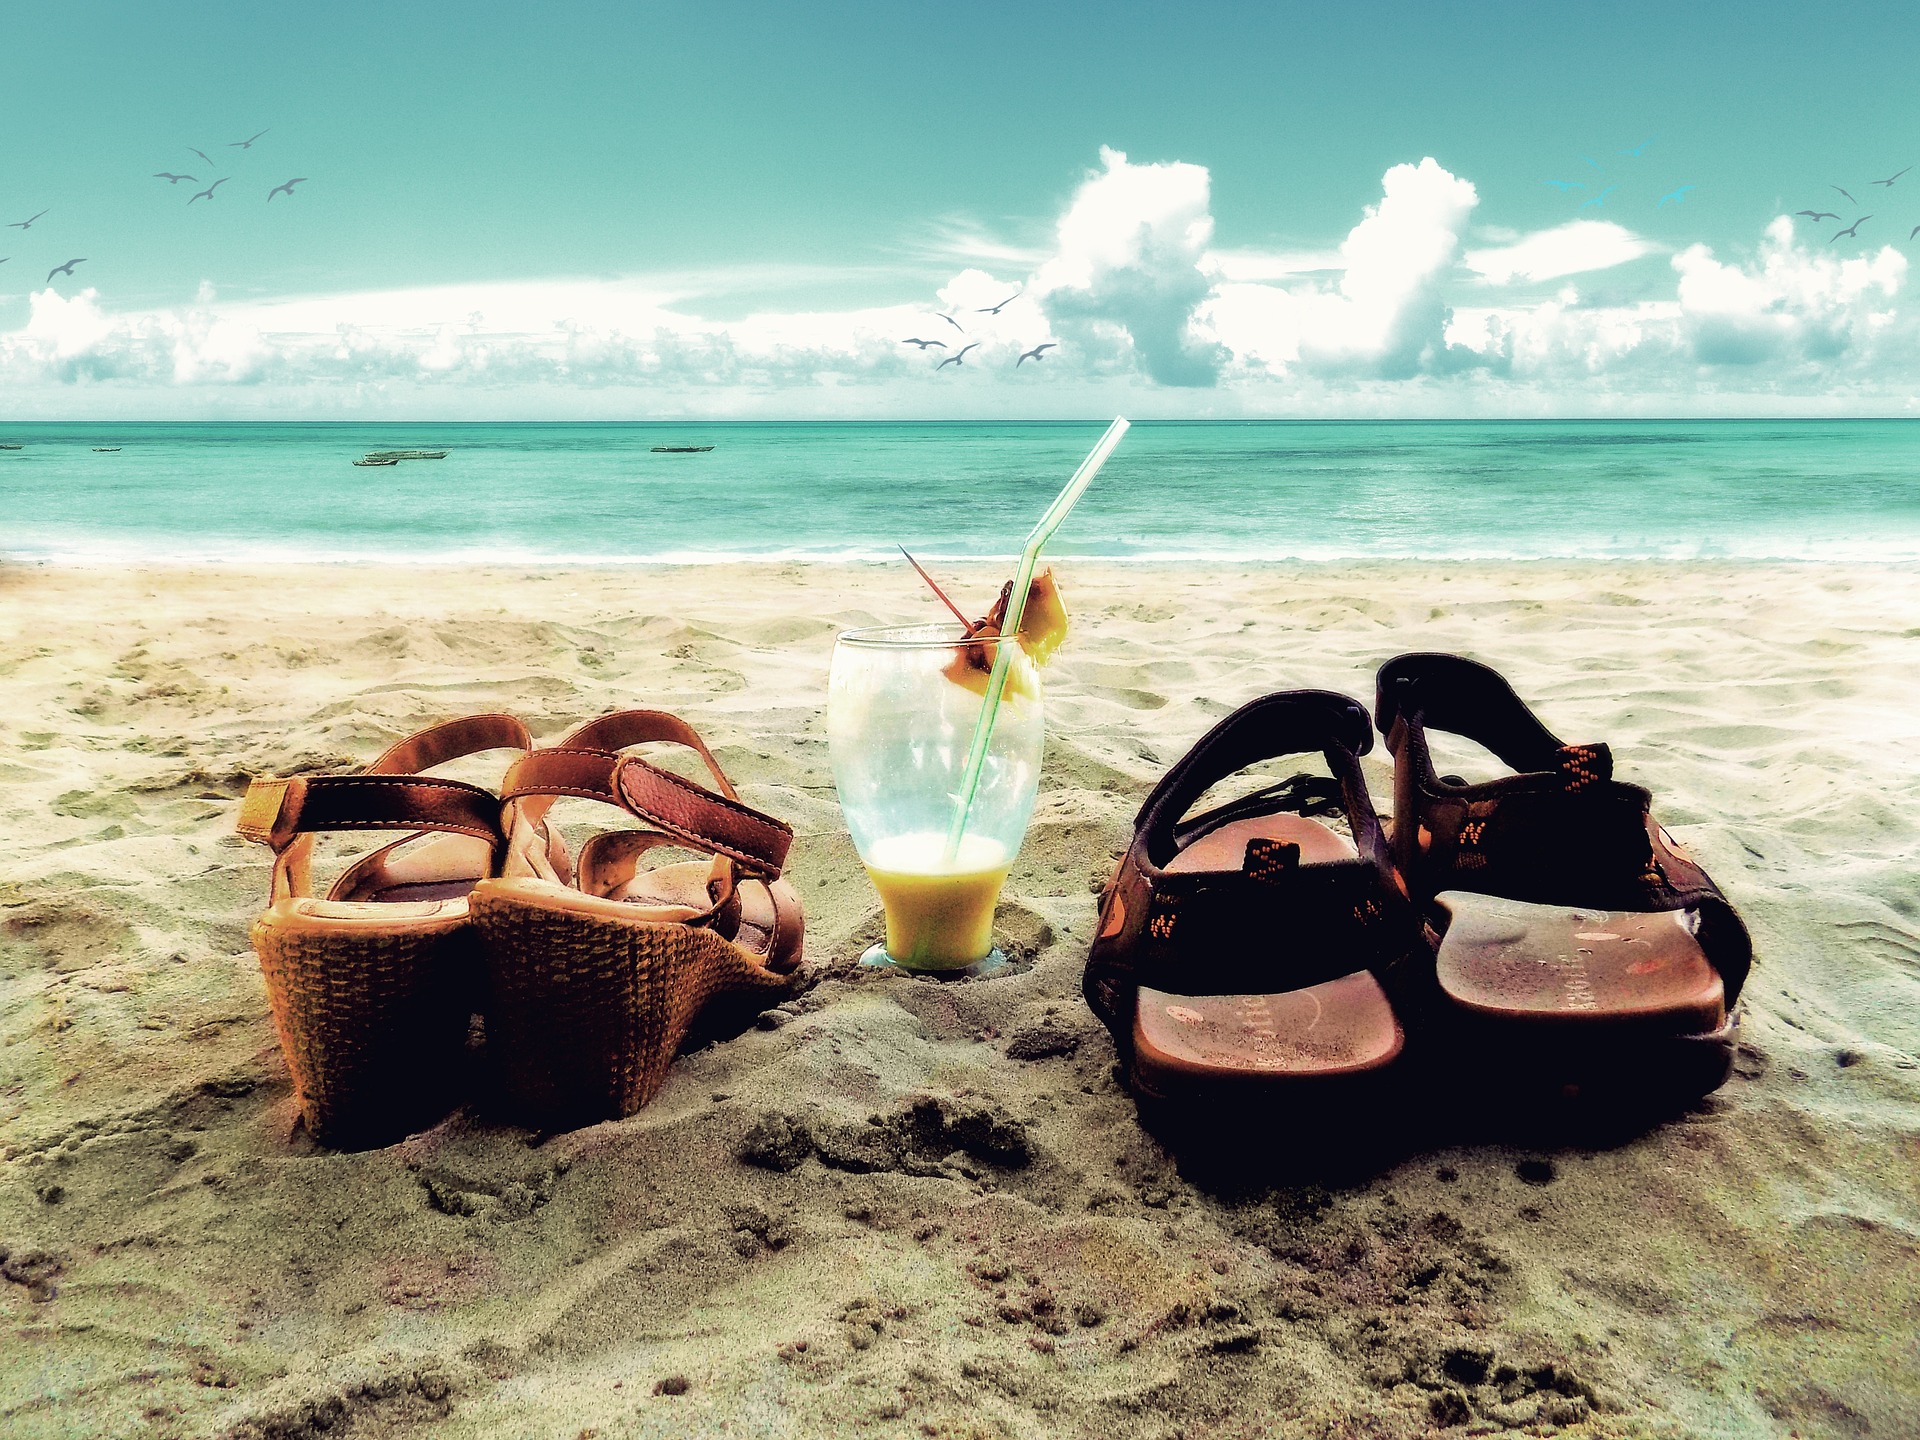 His and hers sandals on a tropical beach by Sierra_Graphic